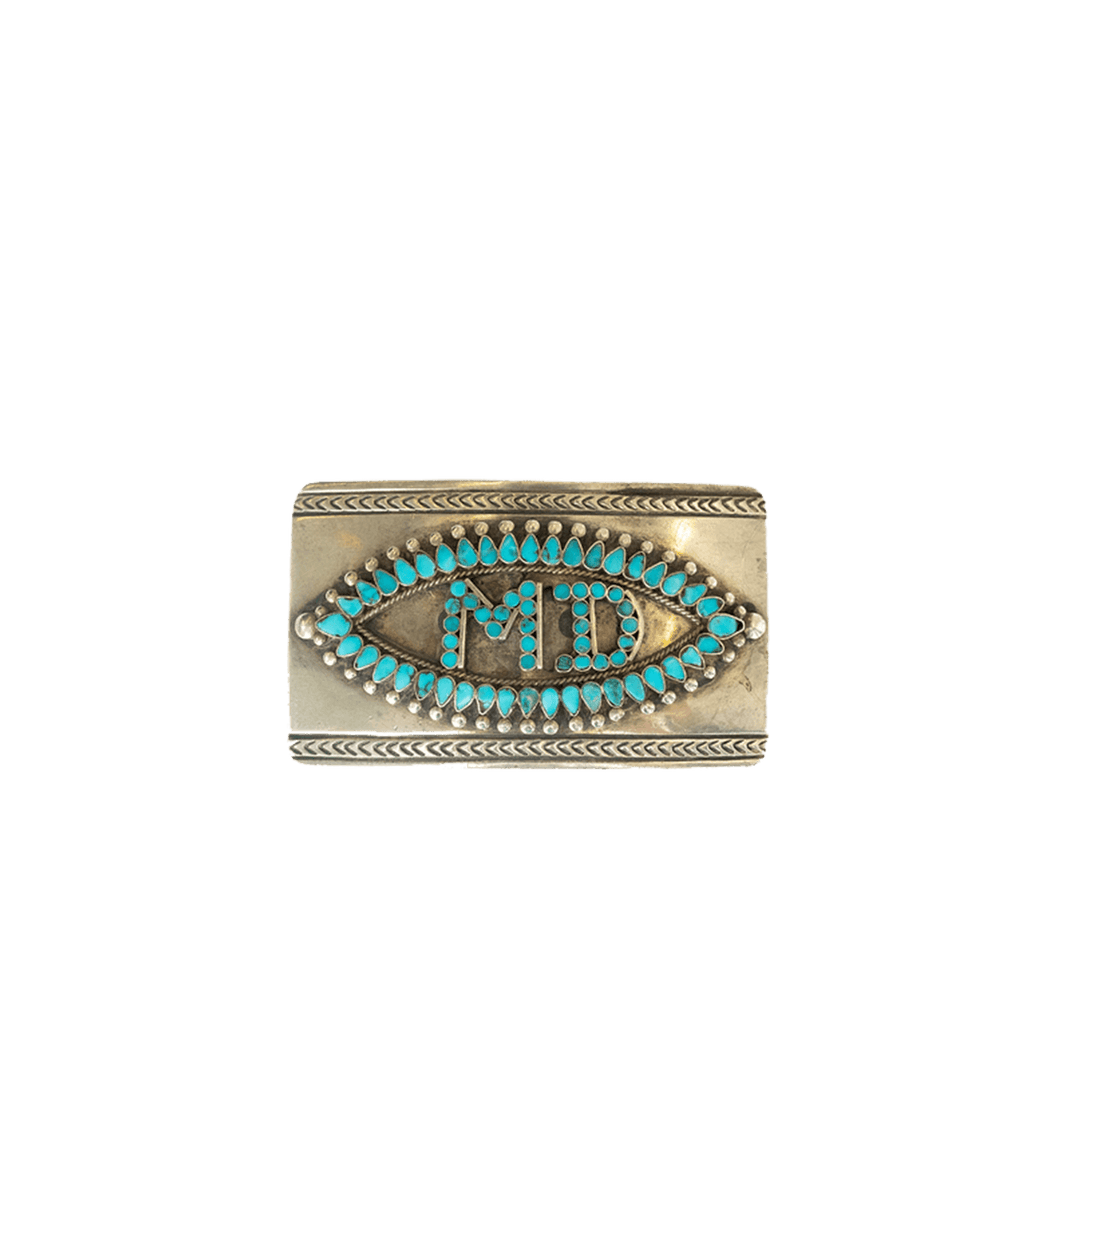 BAMxMC Vintage Hand-Crafted Sterling Silver and Turquoise Belt Buckle